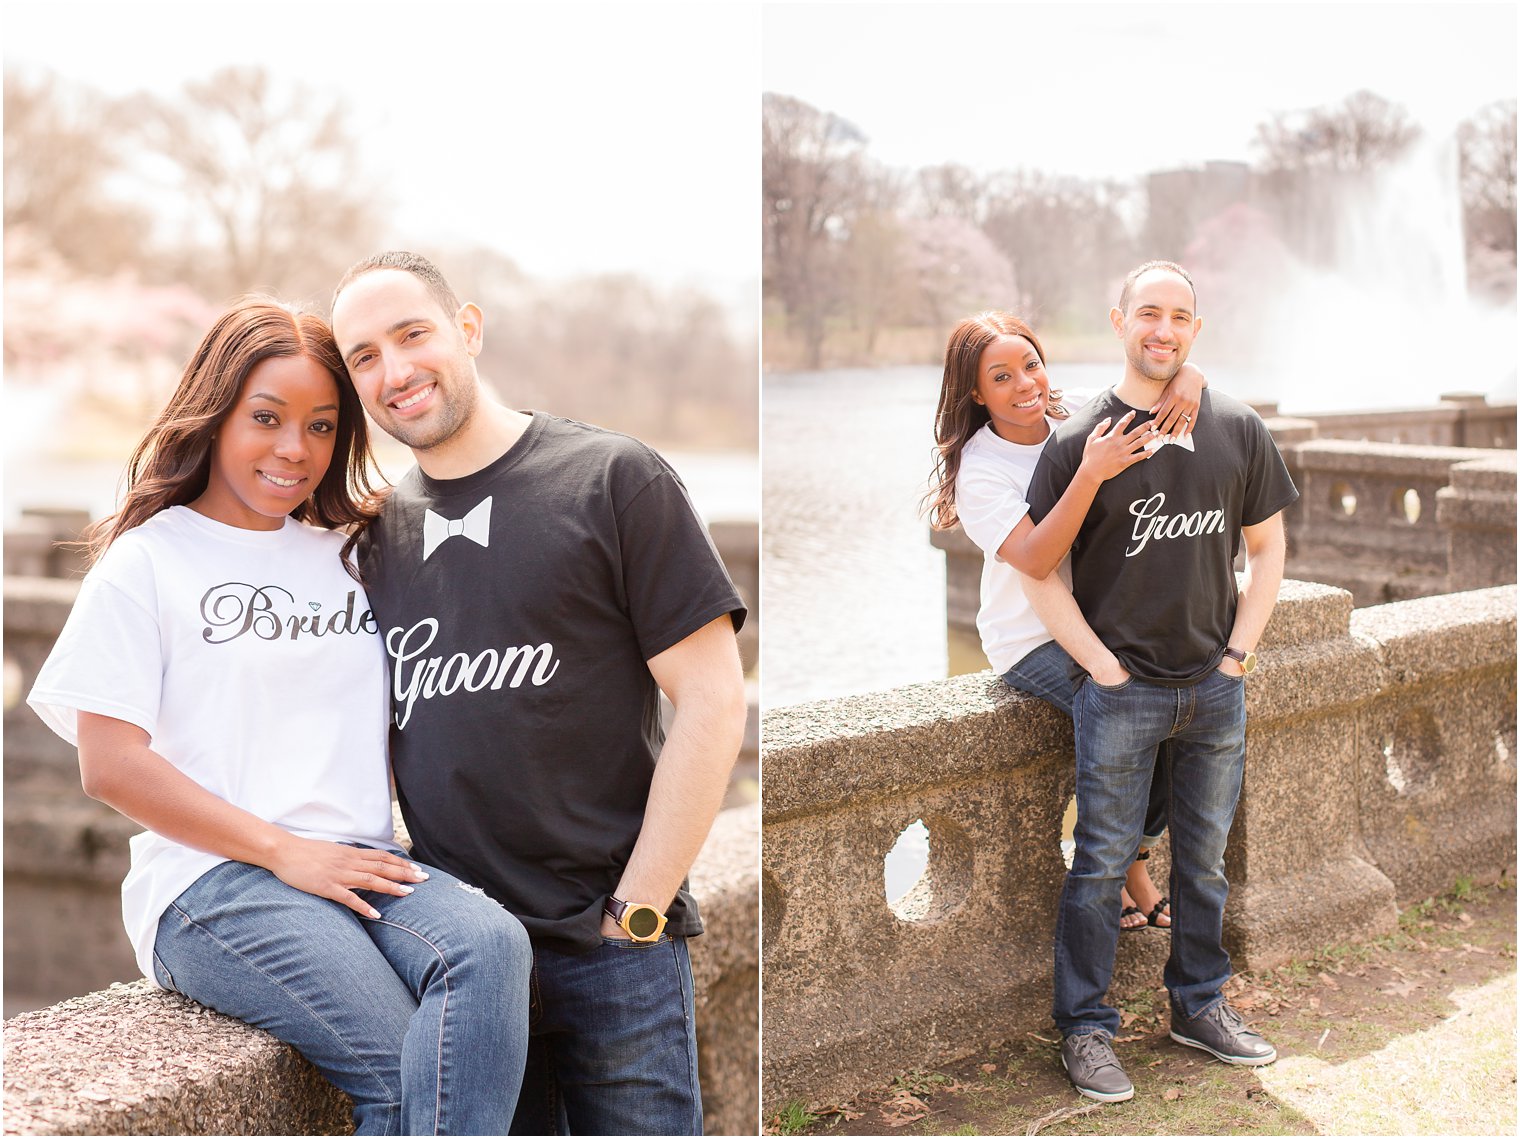 photos of bride and groom with bride and groom t-shirts